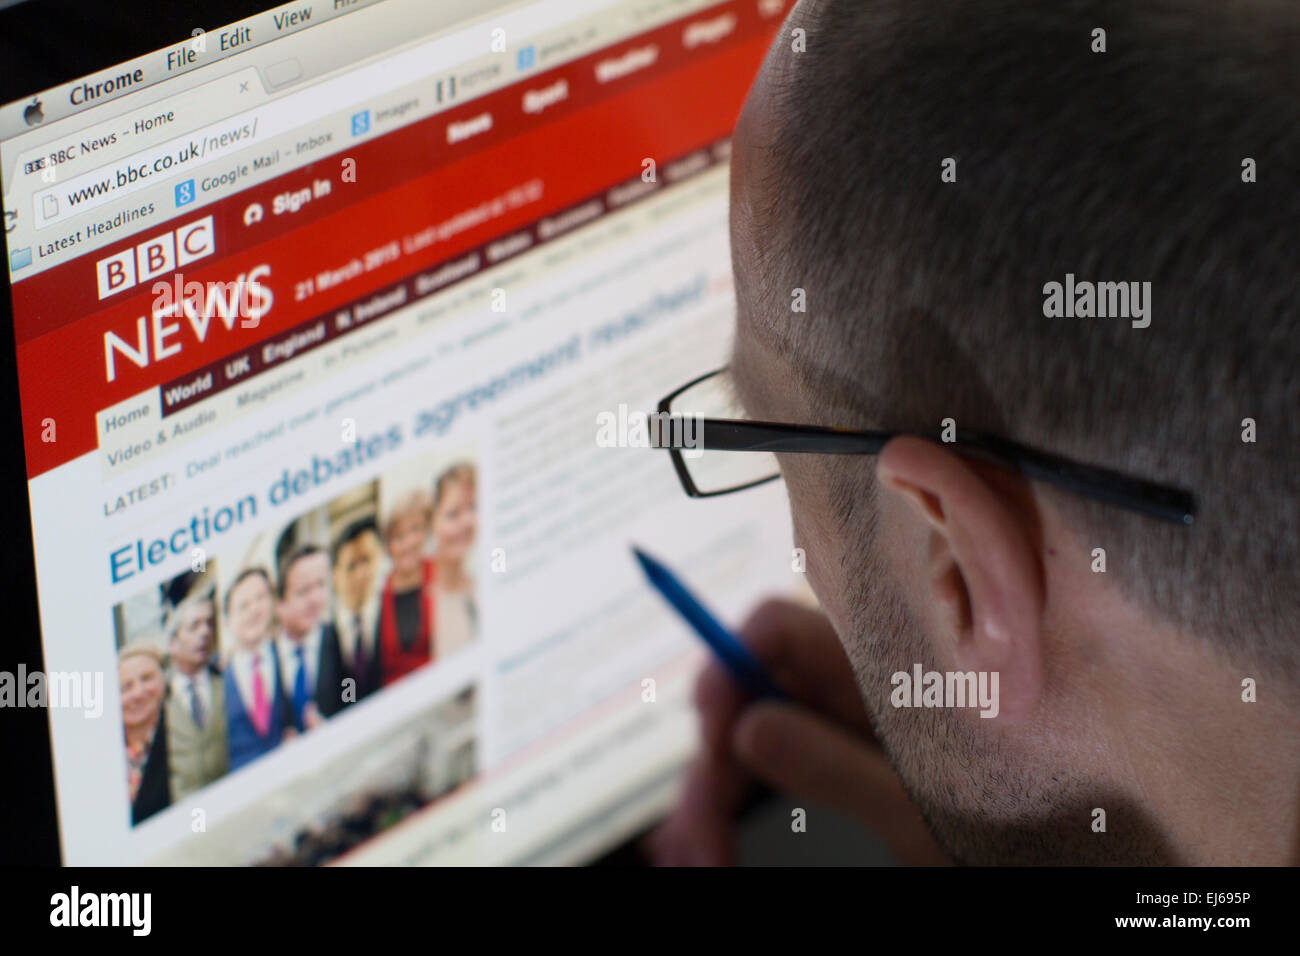 Male looking at the website of bbc news on desktop computer Stock Photo